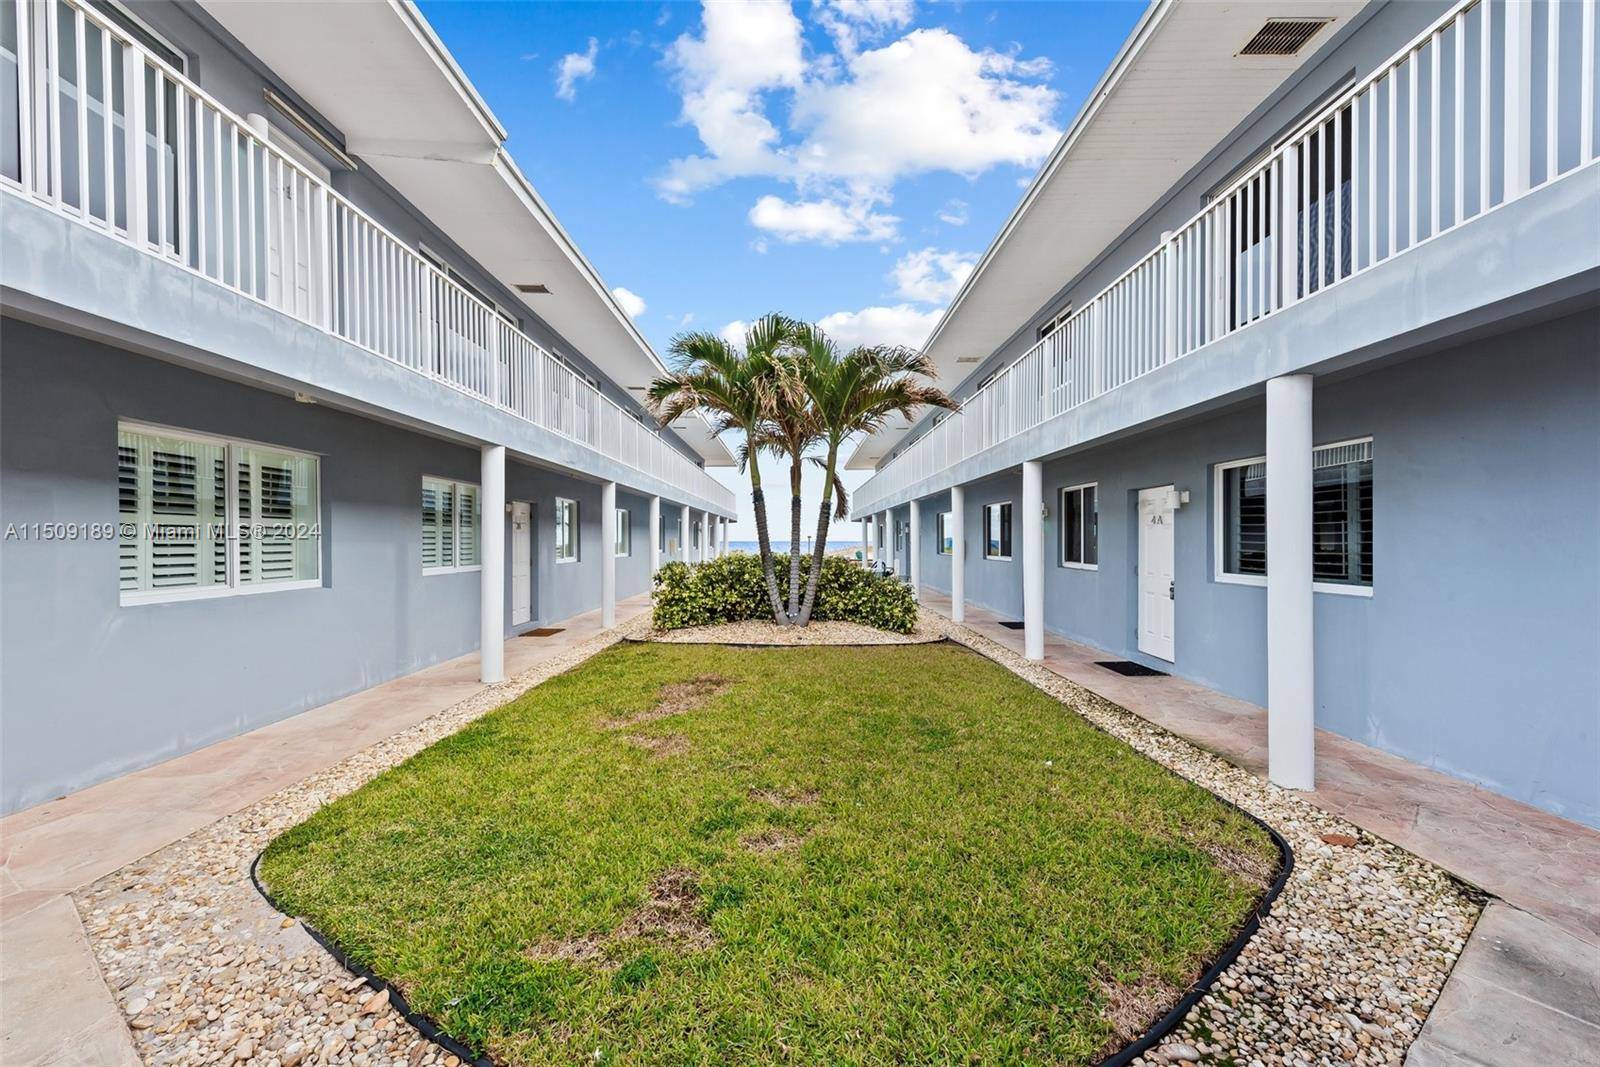 BEACHFRONT 2 BEDROOM 2. 5 BATHROOM TOWNHOME COMPLETELY REMODELED IN A BOUTIQUE BLDG.